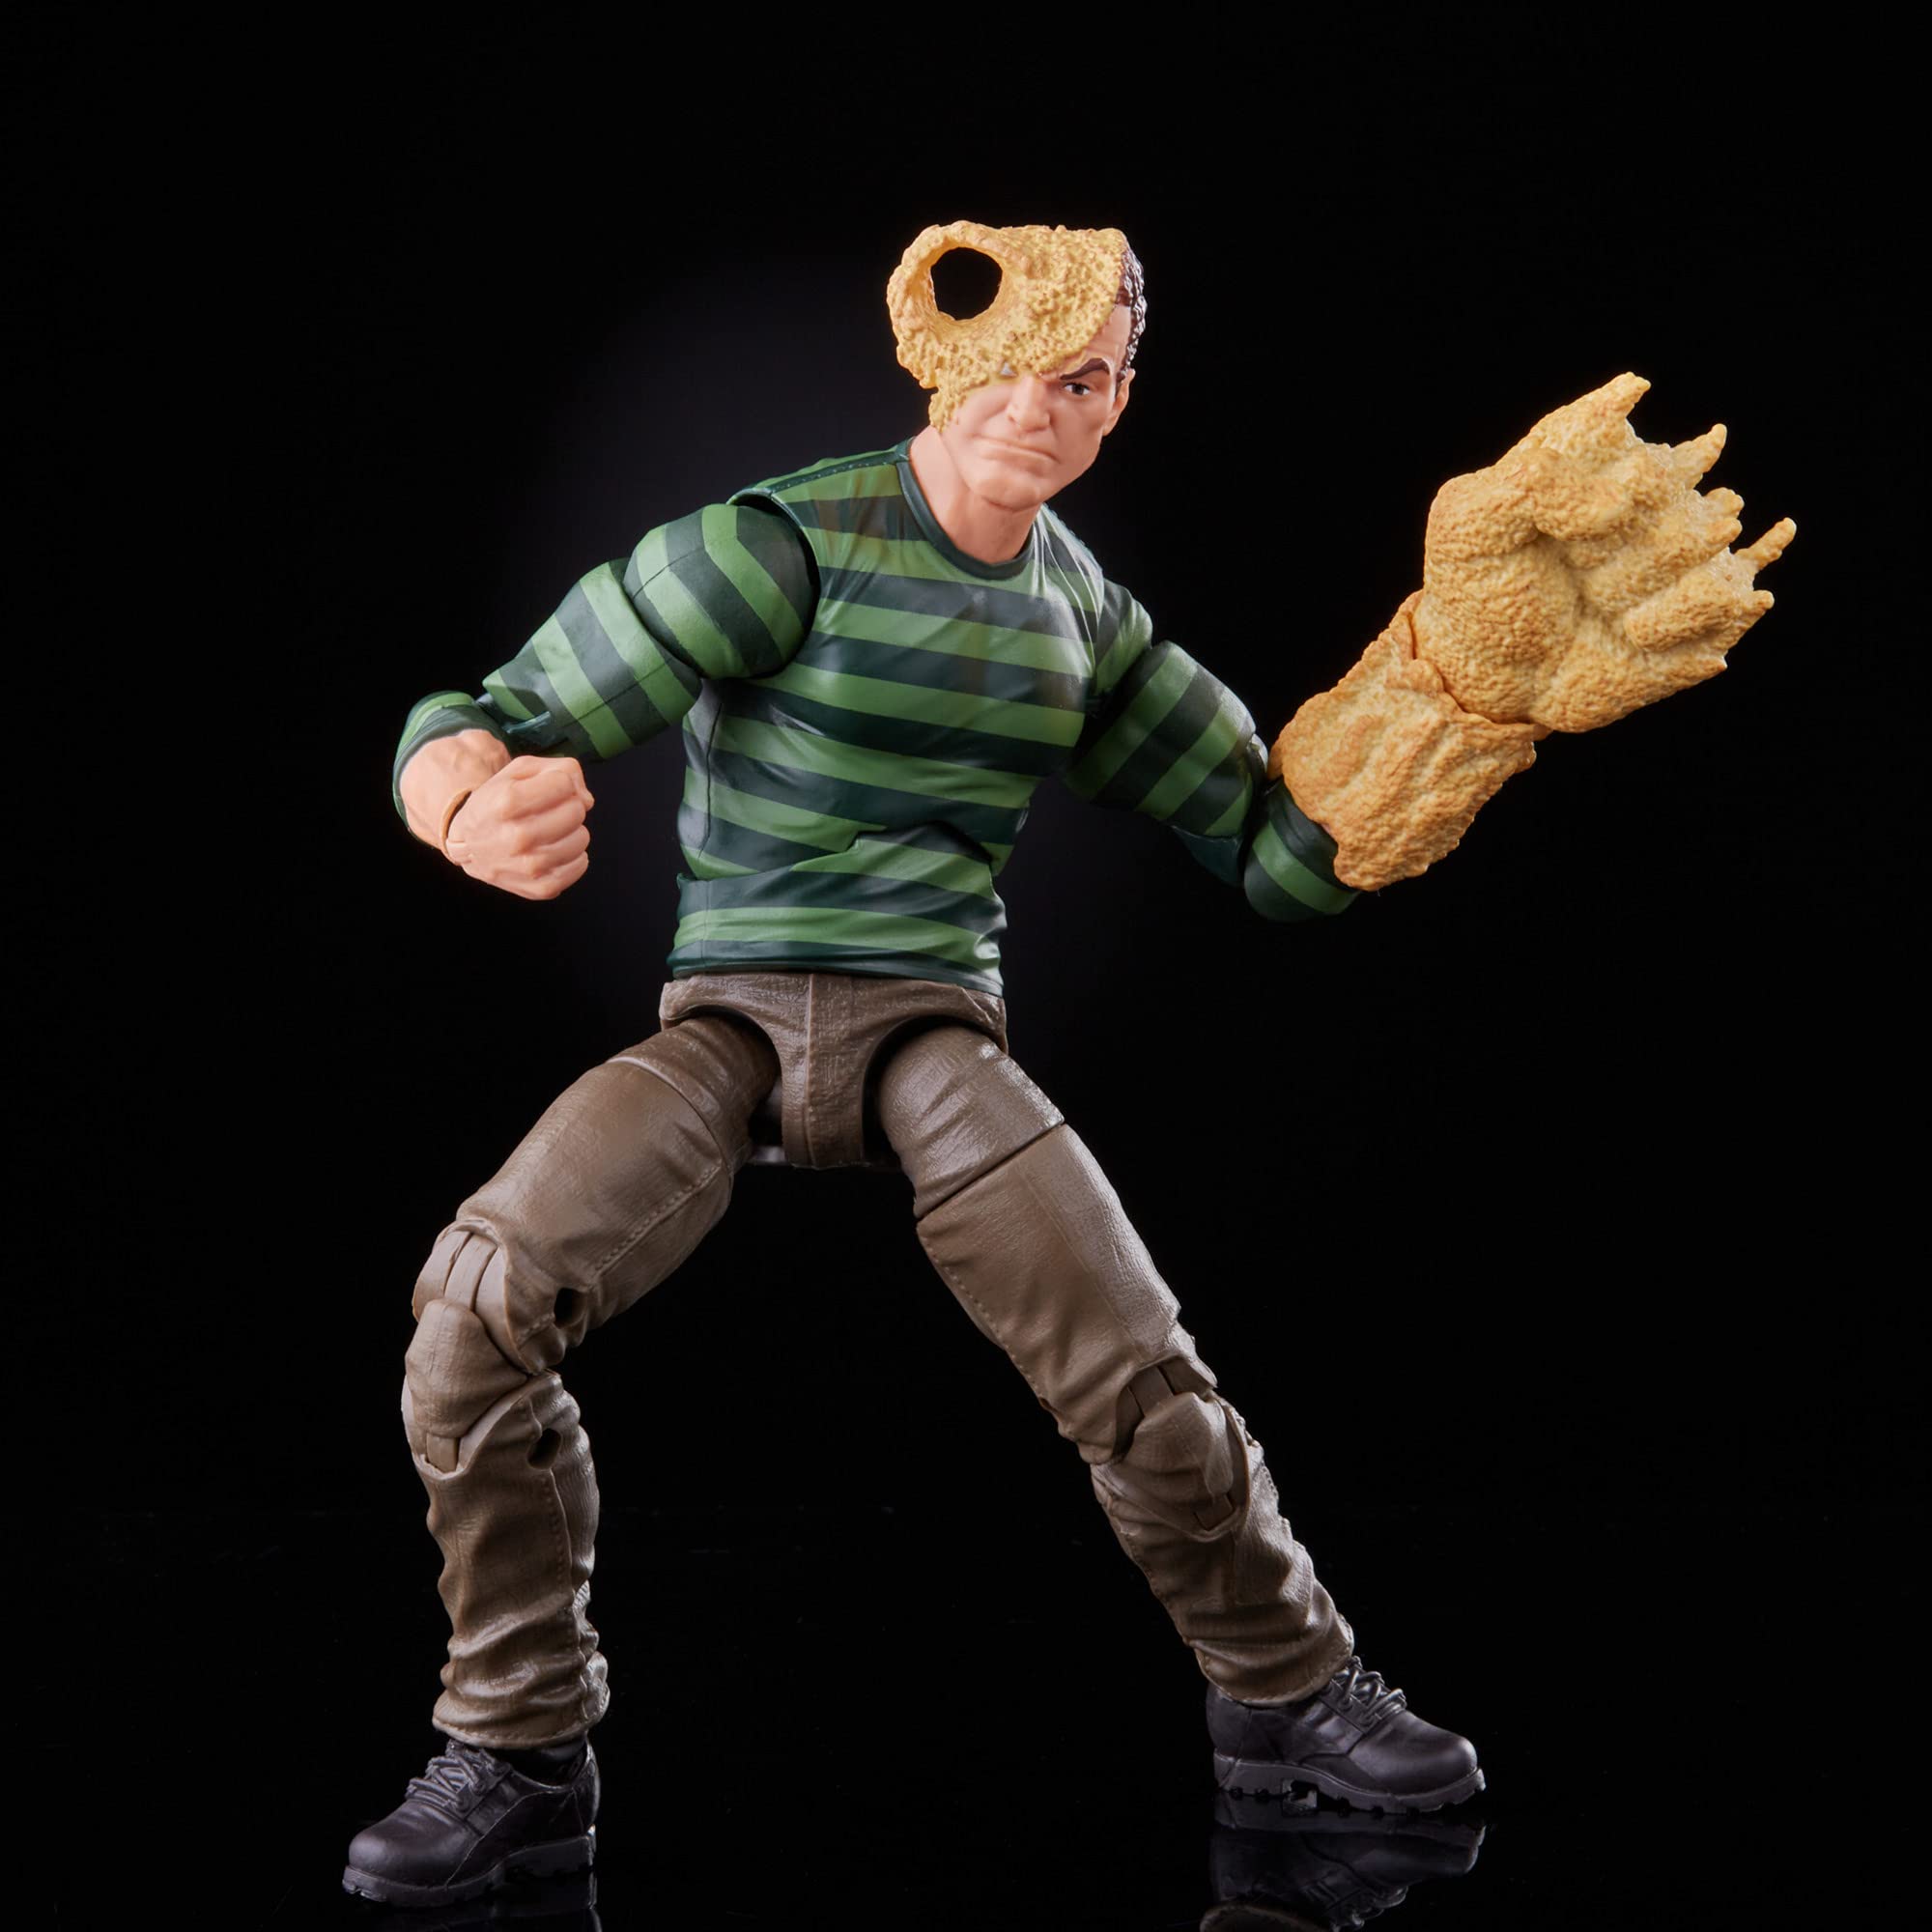 Spider-Man Hasbro Marvel Legends Series 6-inch Scale Action Figure Toy Marvel’s Sandman, Includes Premium Design, and 5 Accessories